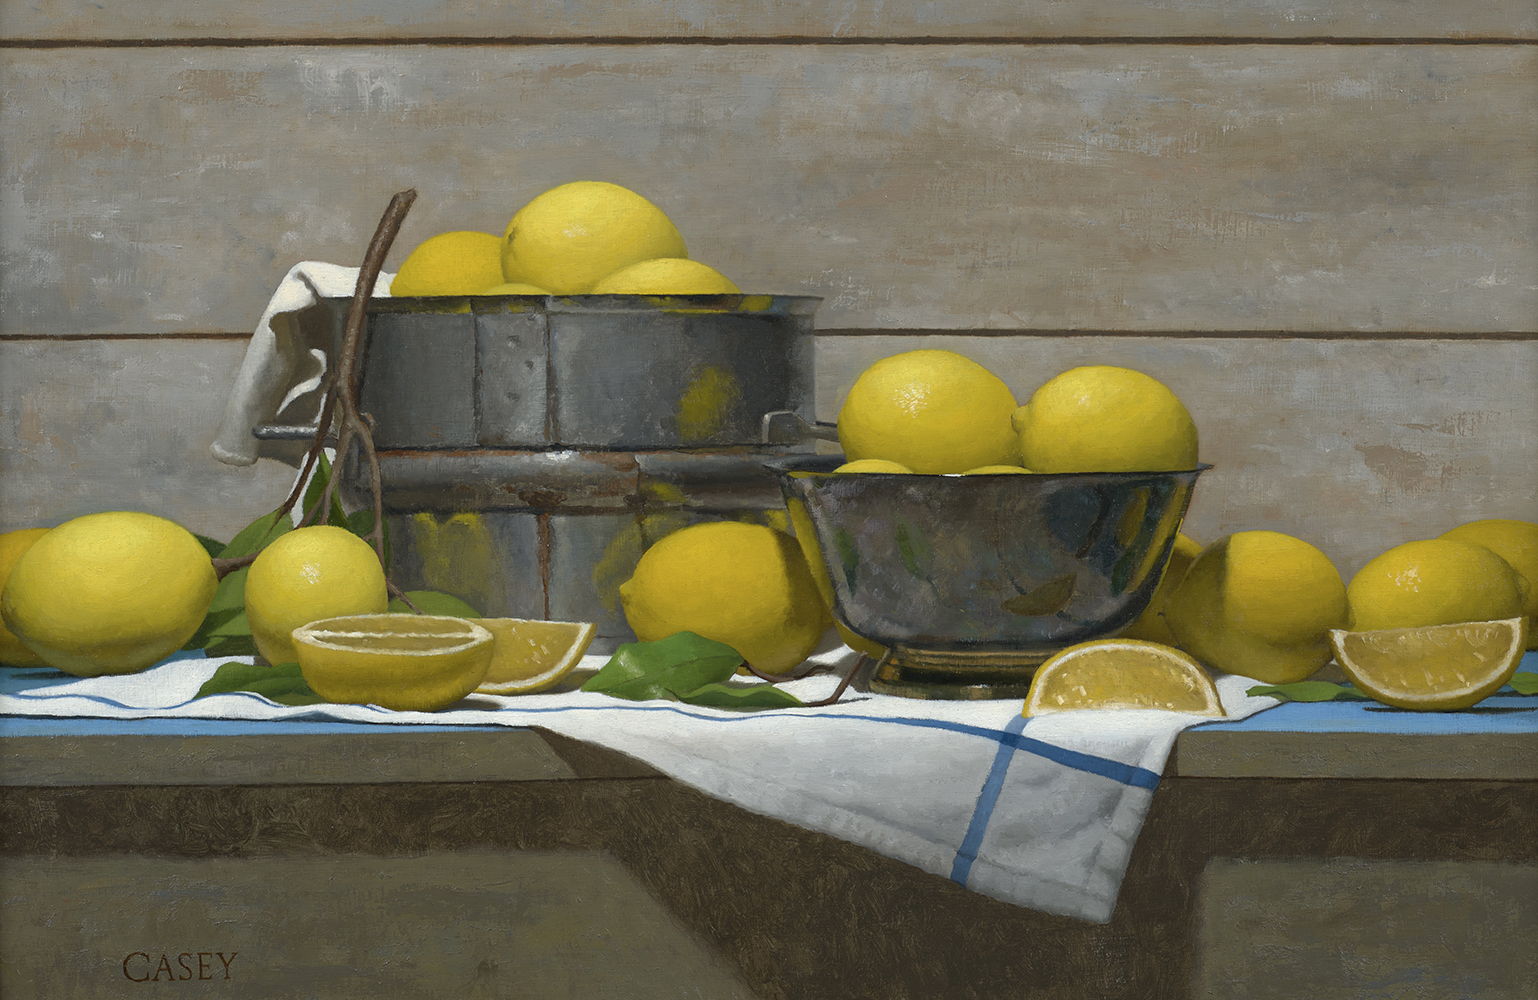 todd_m_casey_tc1175_country_lemons_and_silver_bowl.jpg